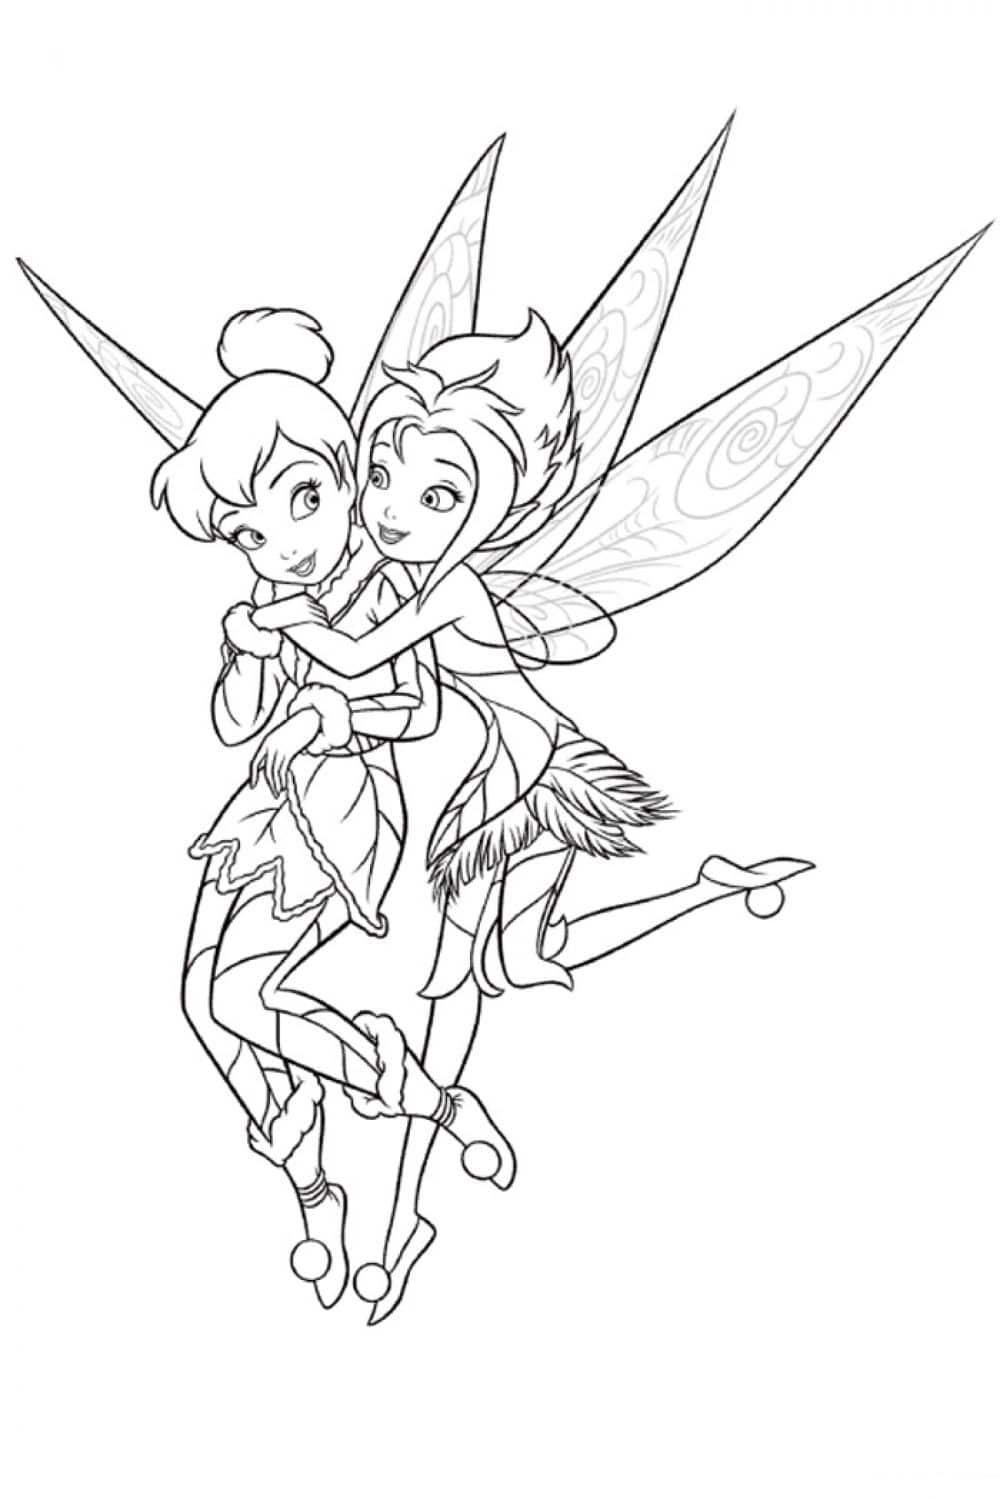 Painting of two fairies hugging